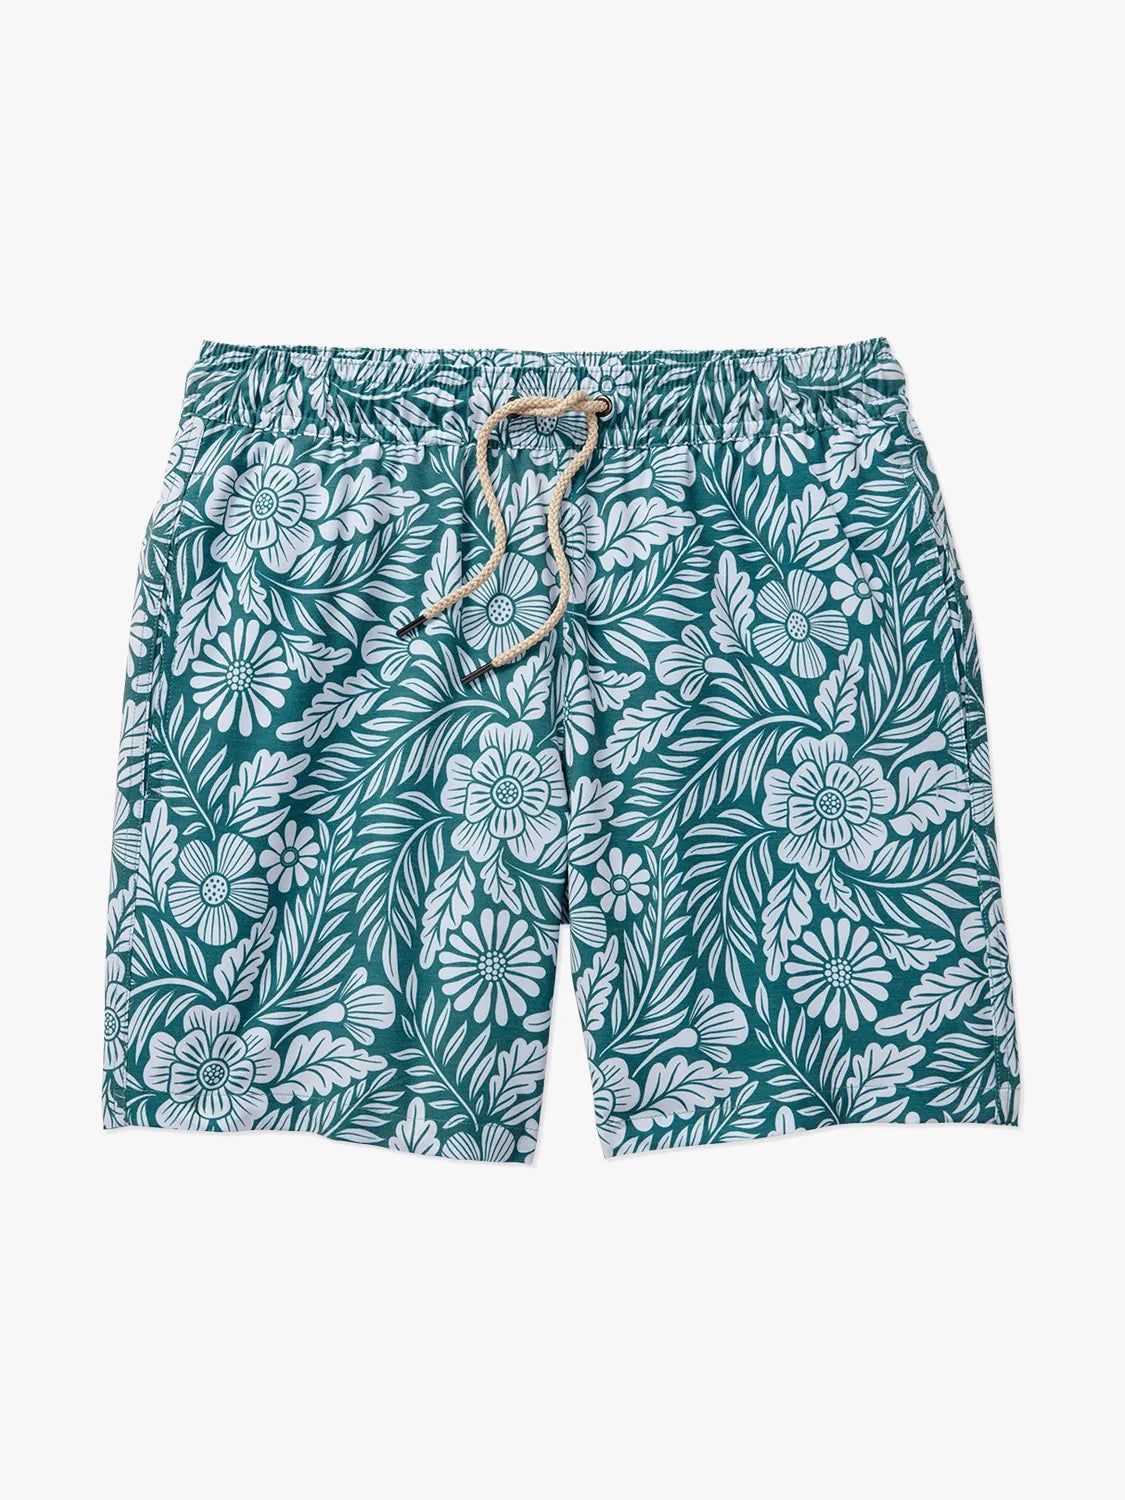 The Bayberry Trunk | Green Floral | Fair Harbor